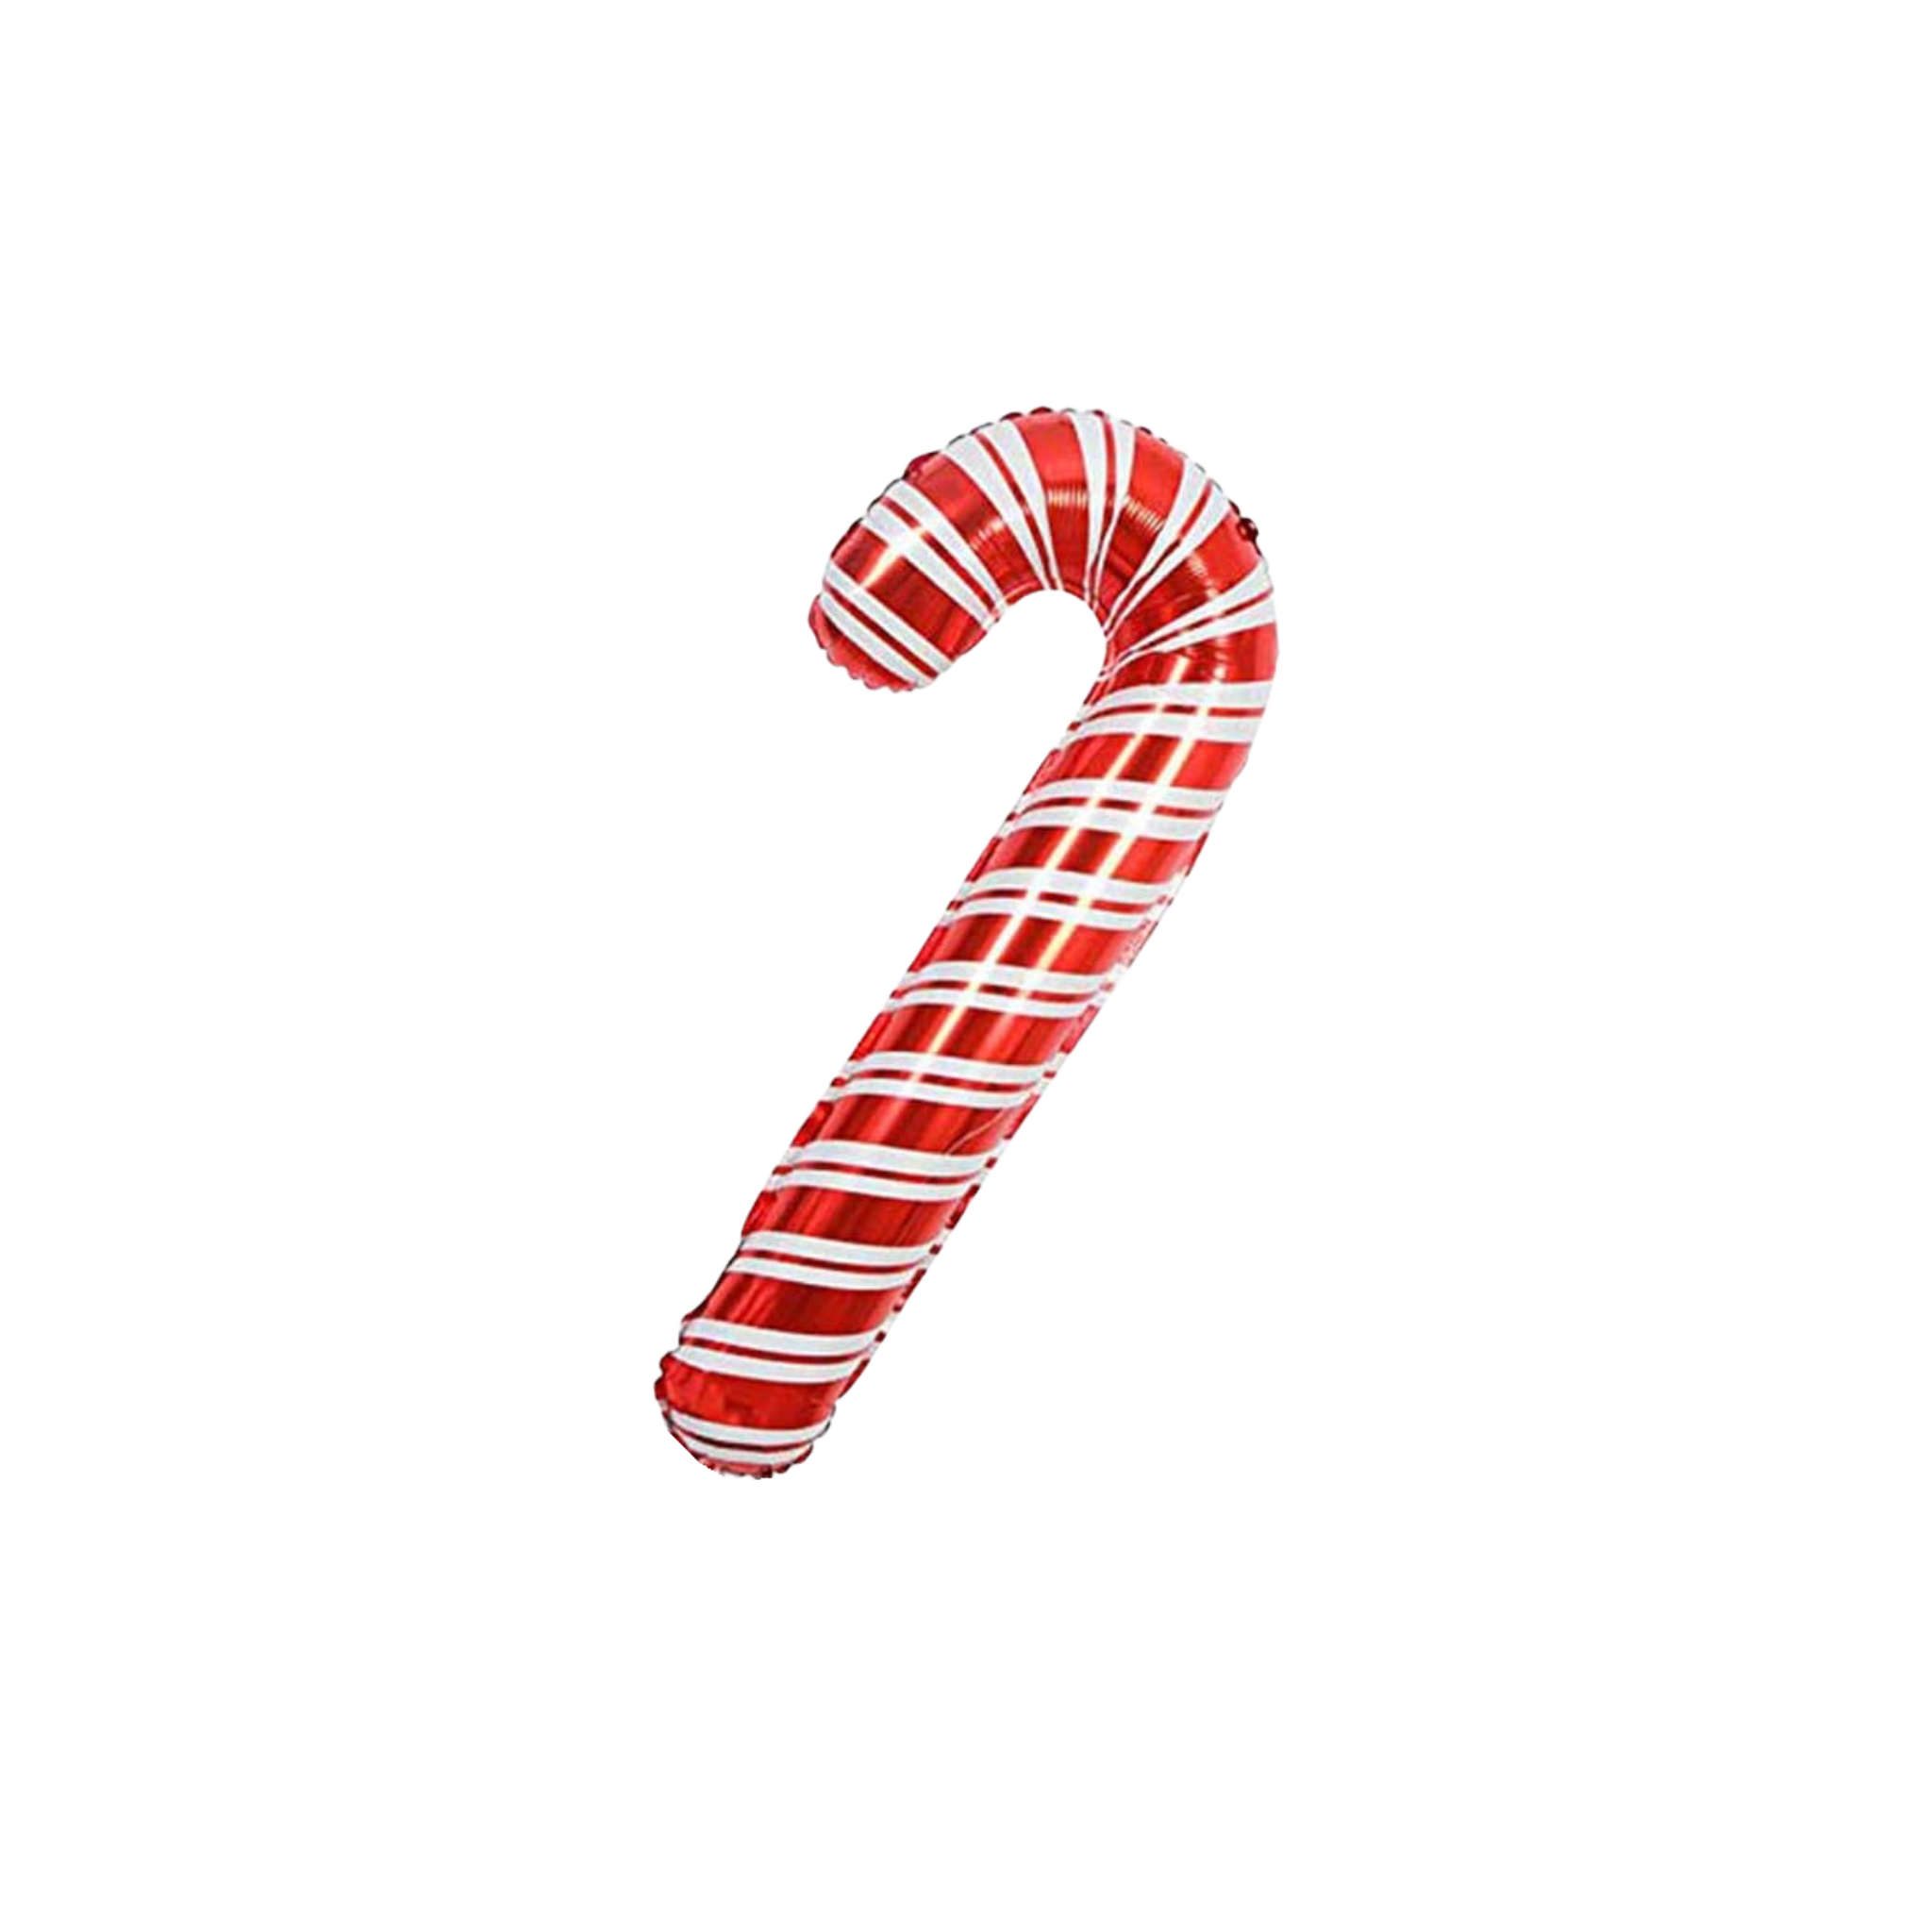 Candy Cane Balloon (pack of 3)